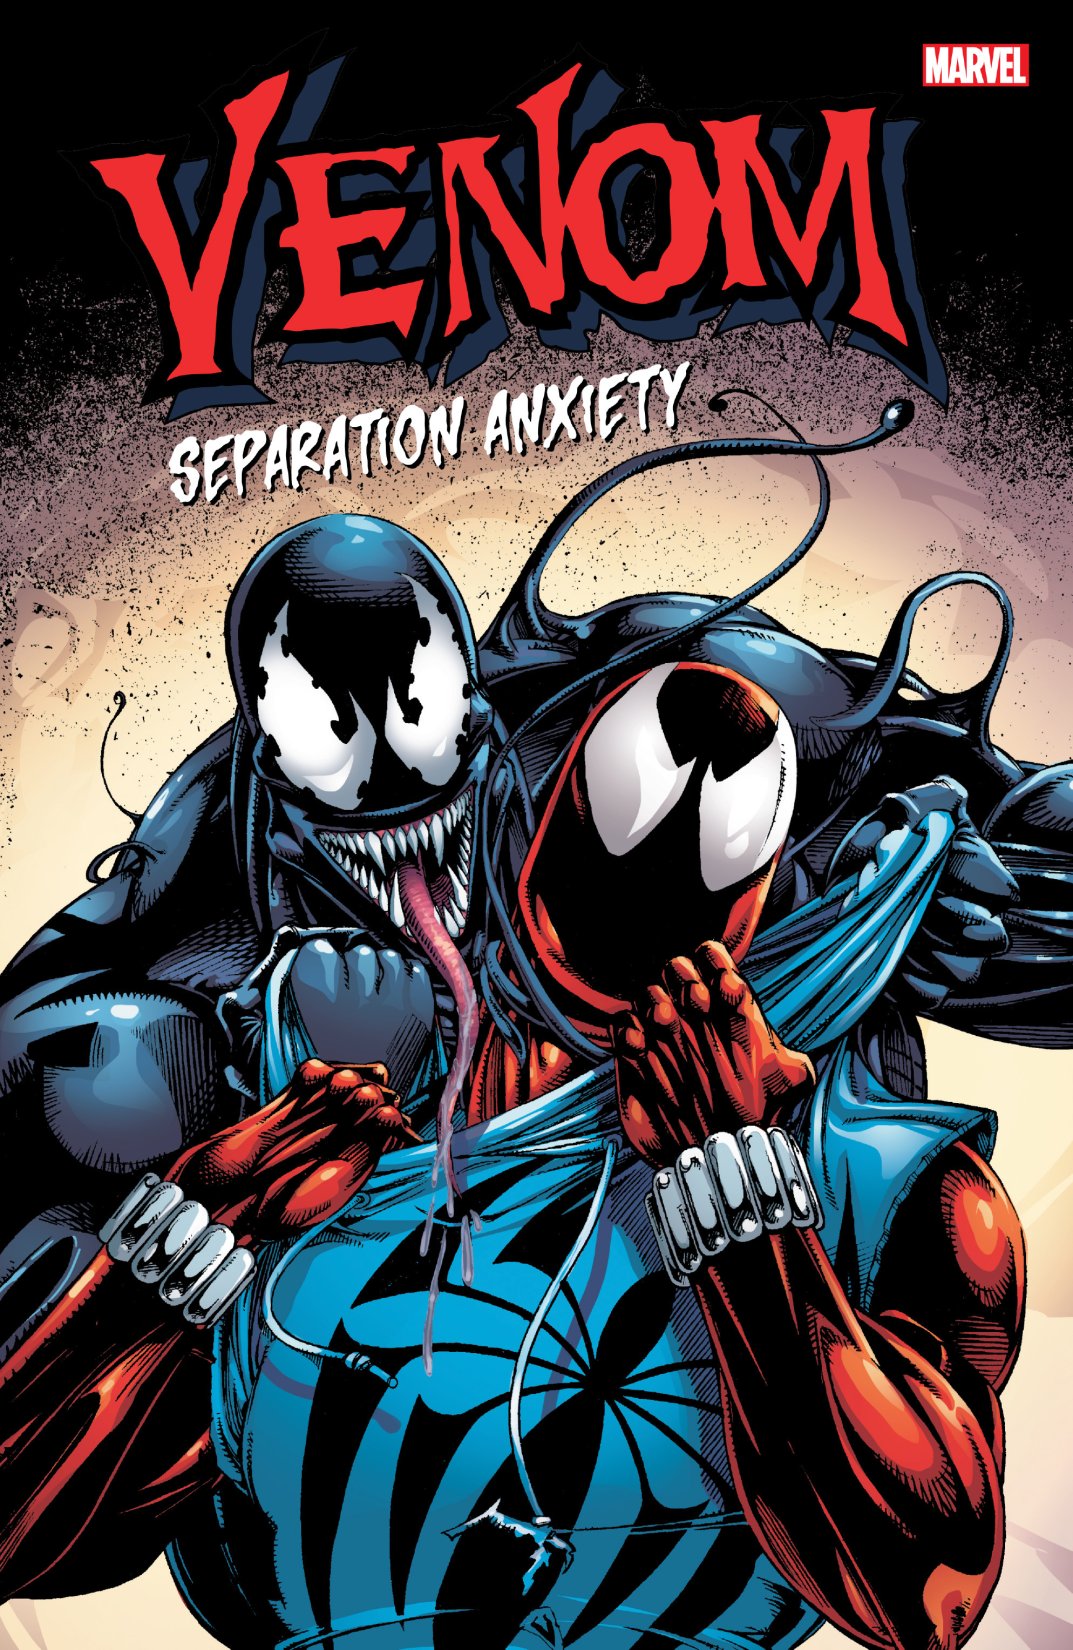 Read online Venom: Separation Anxiety comic -  Issue # _2016 Edition (Part 1) - 1